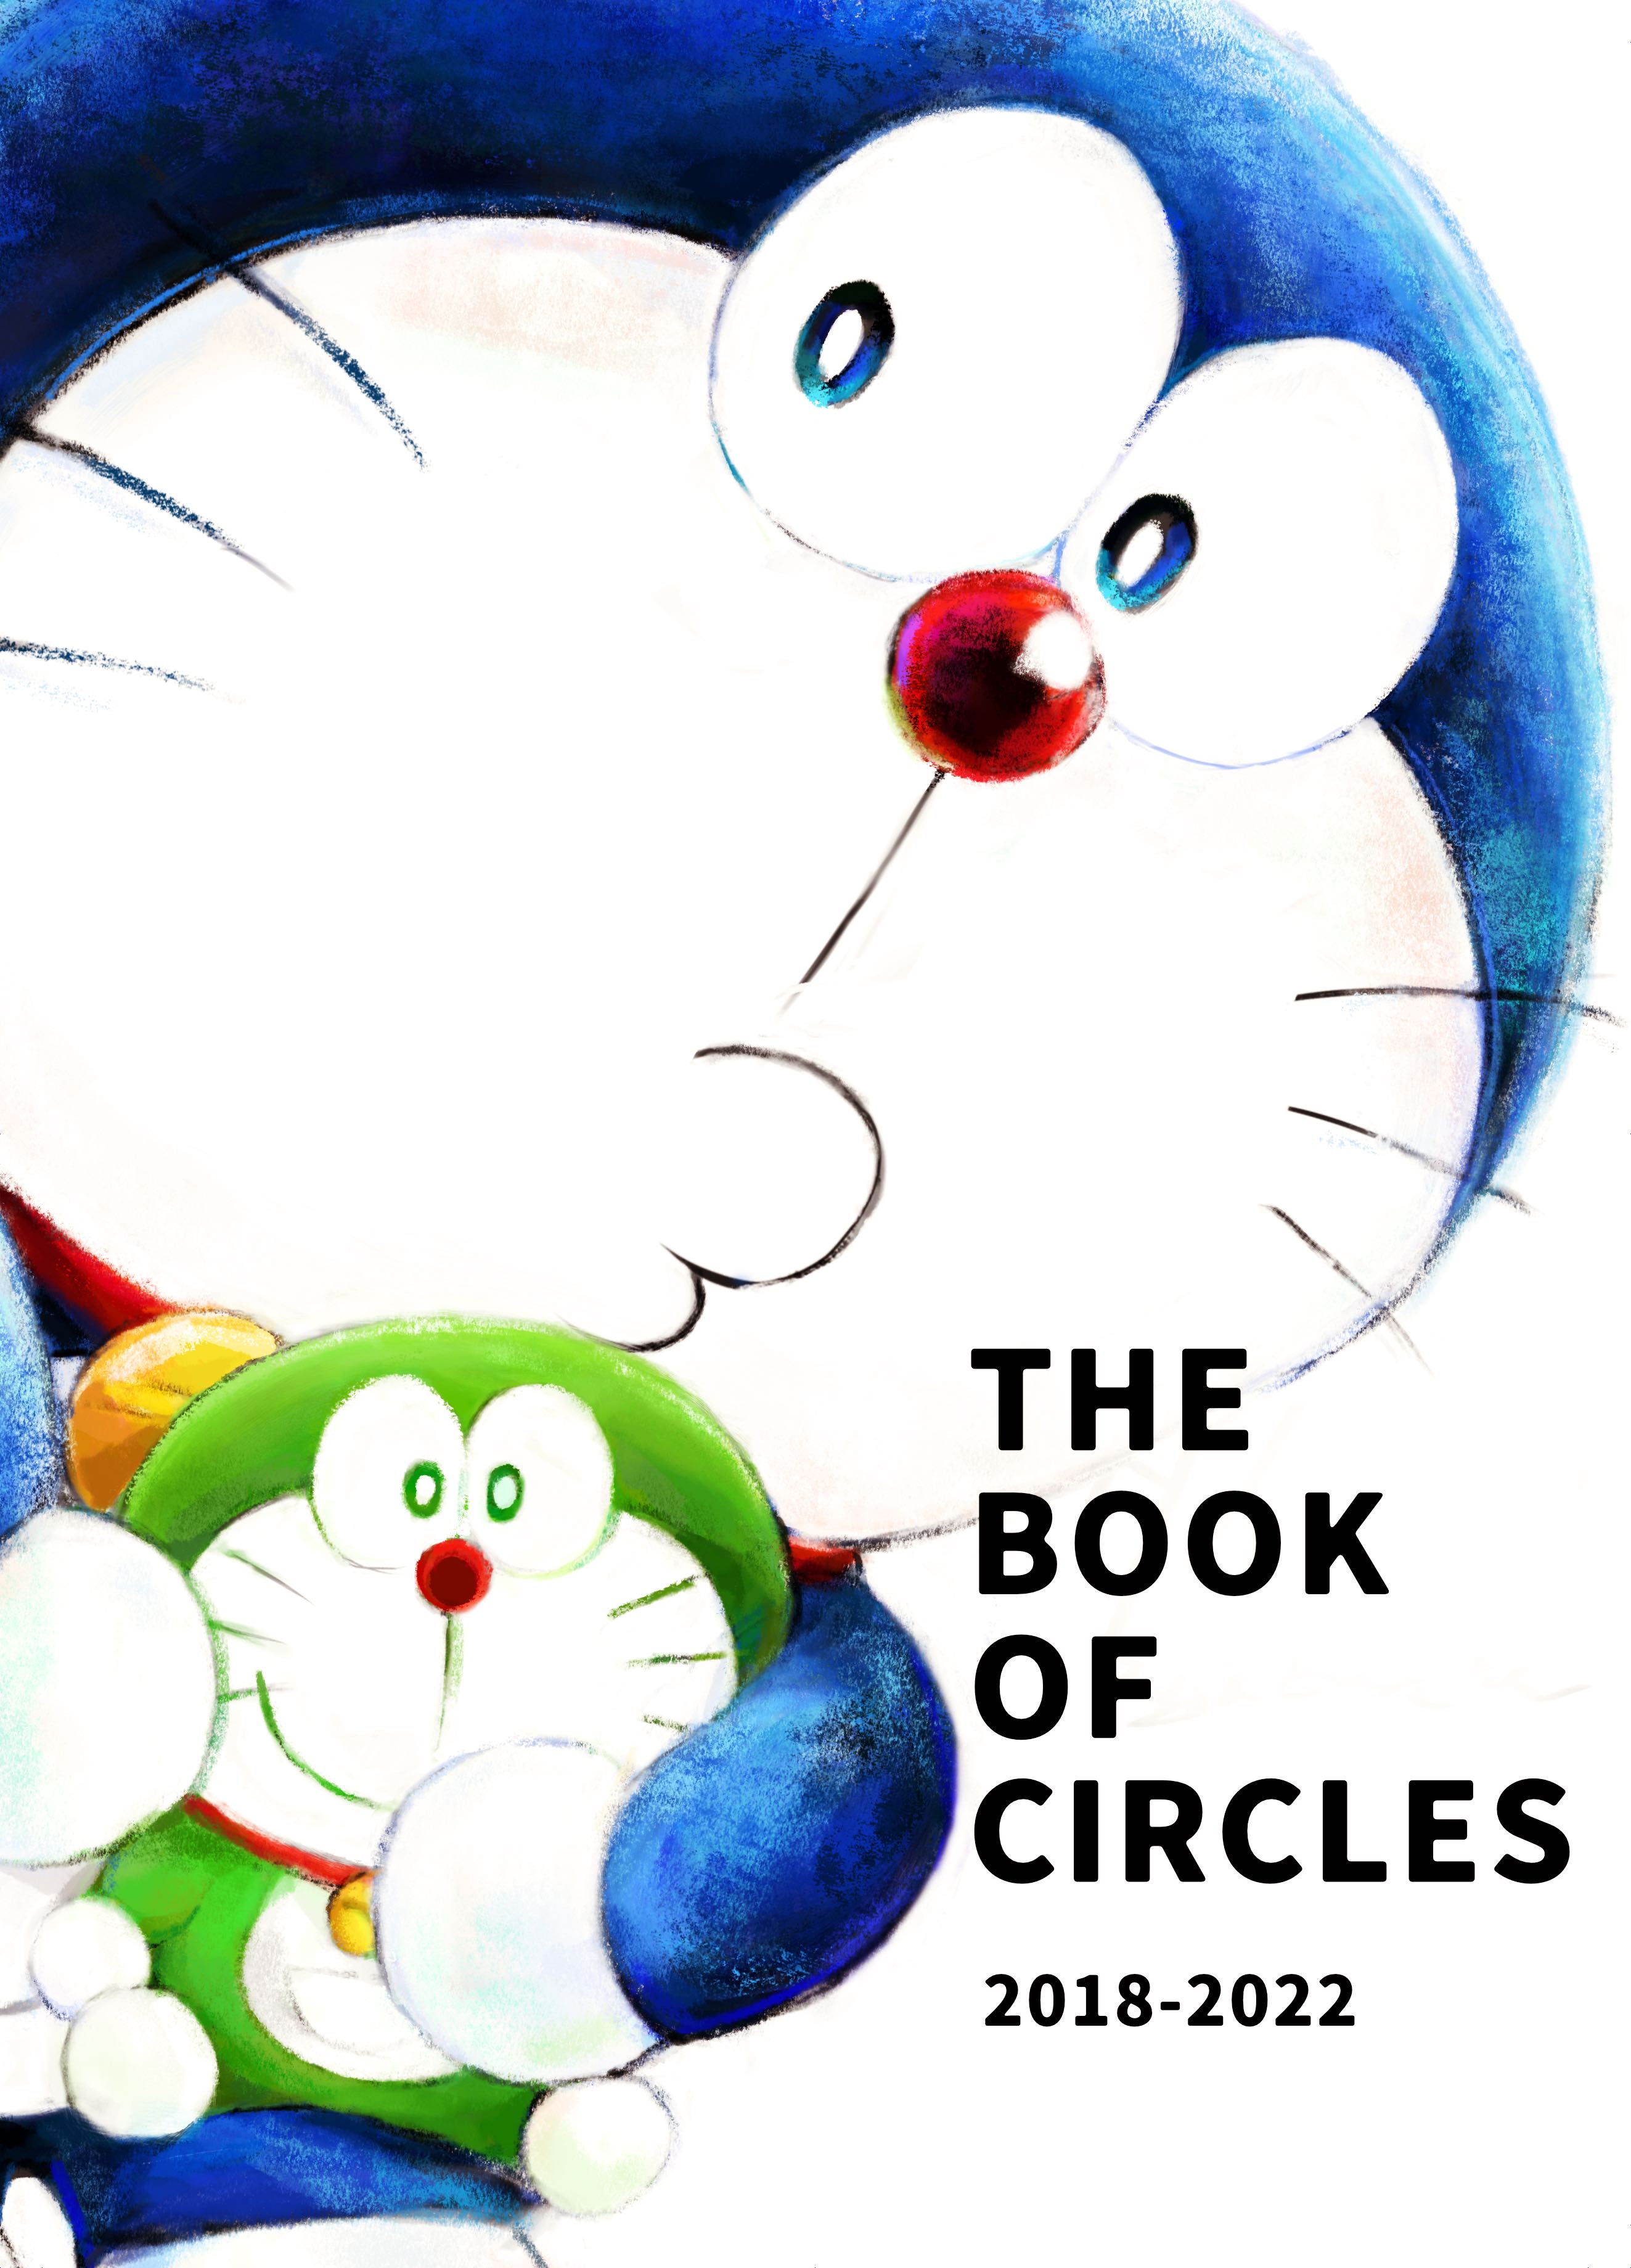 THE BOOK OF CIRCLES